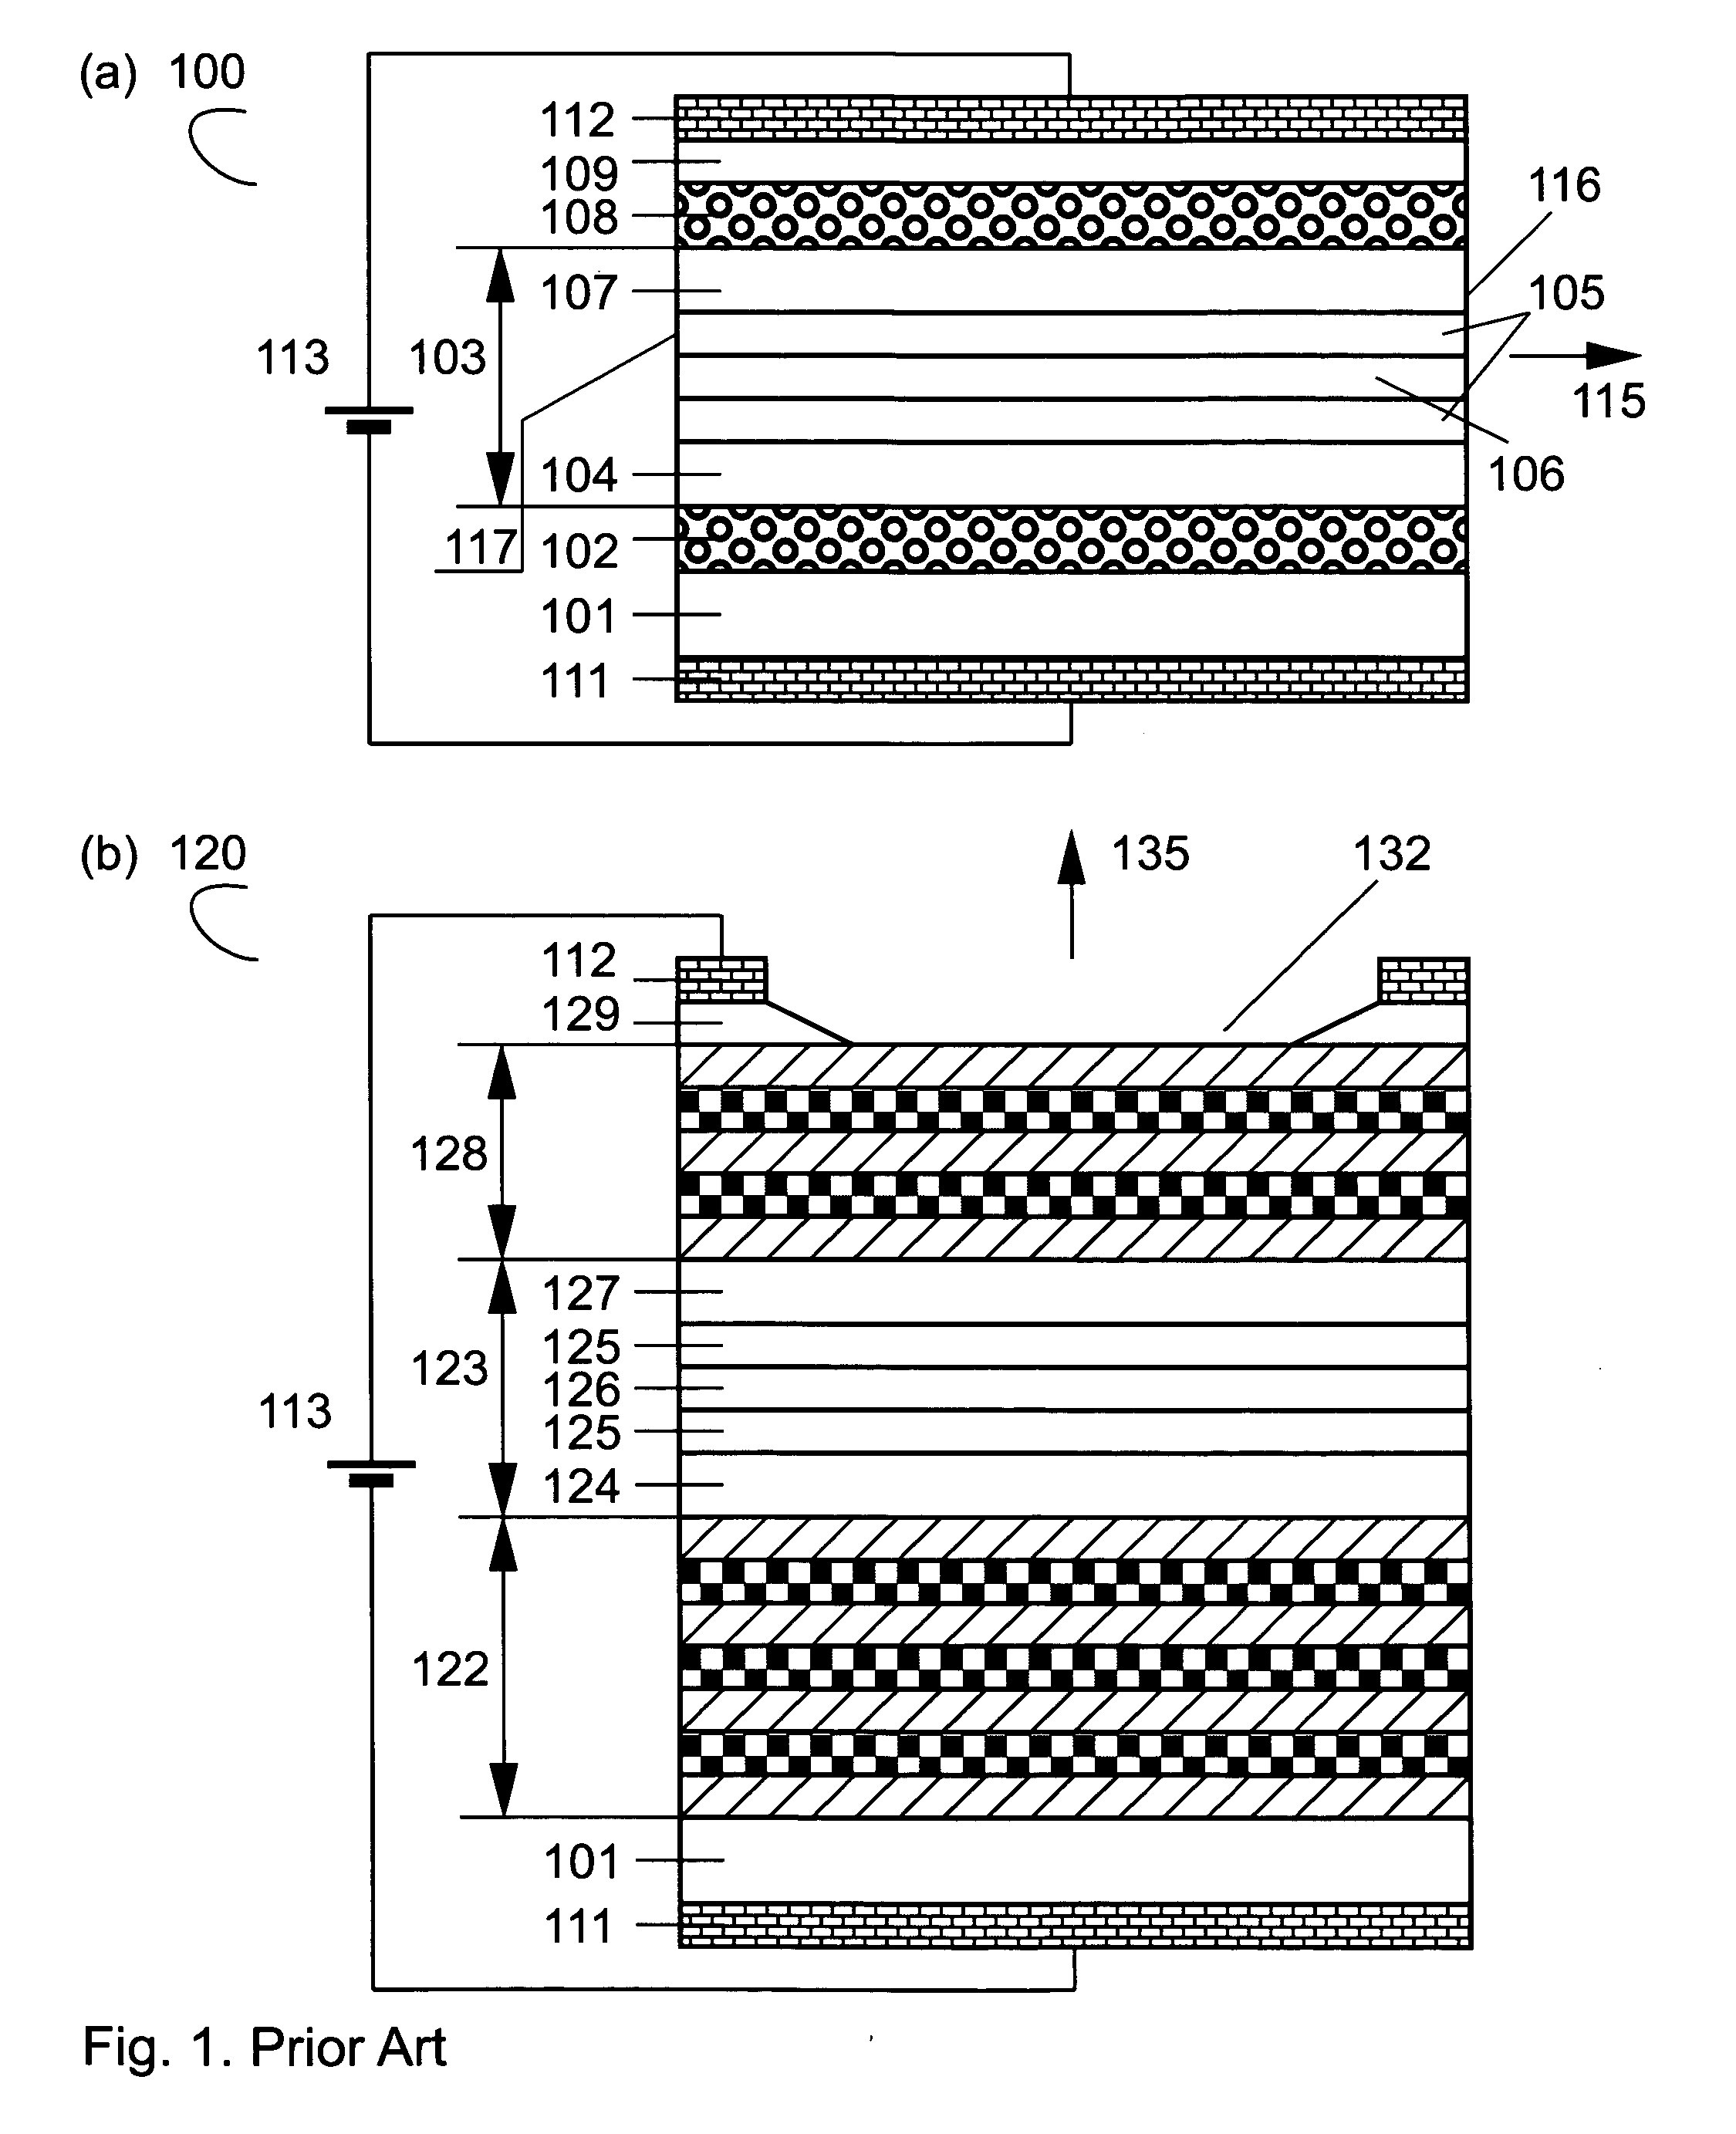 Optoelectronic device and method of making same